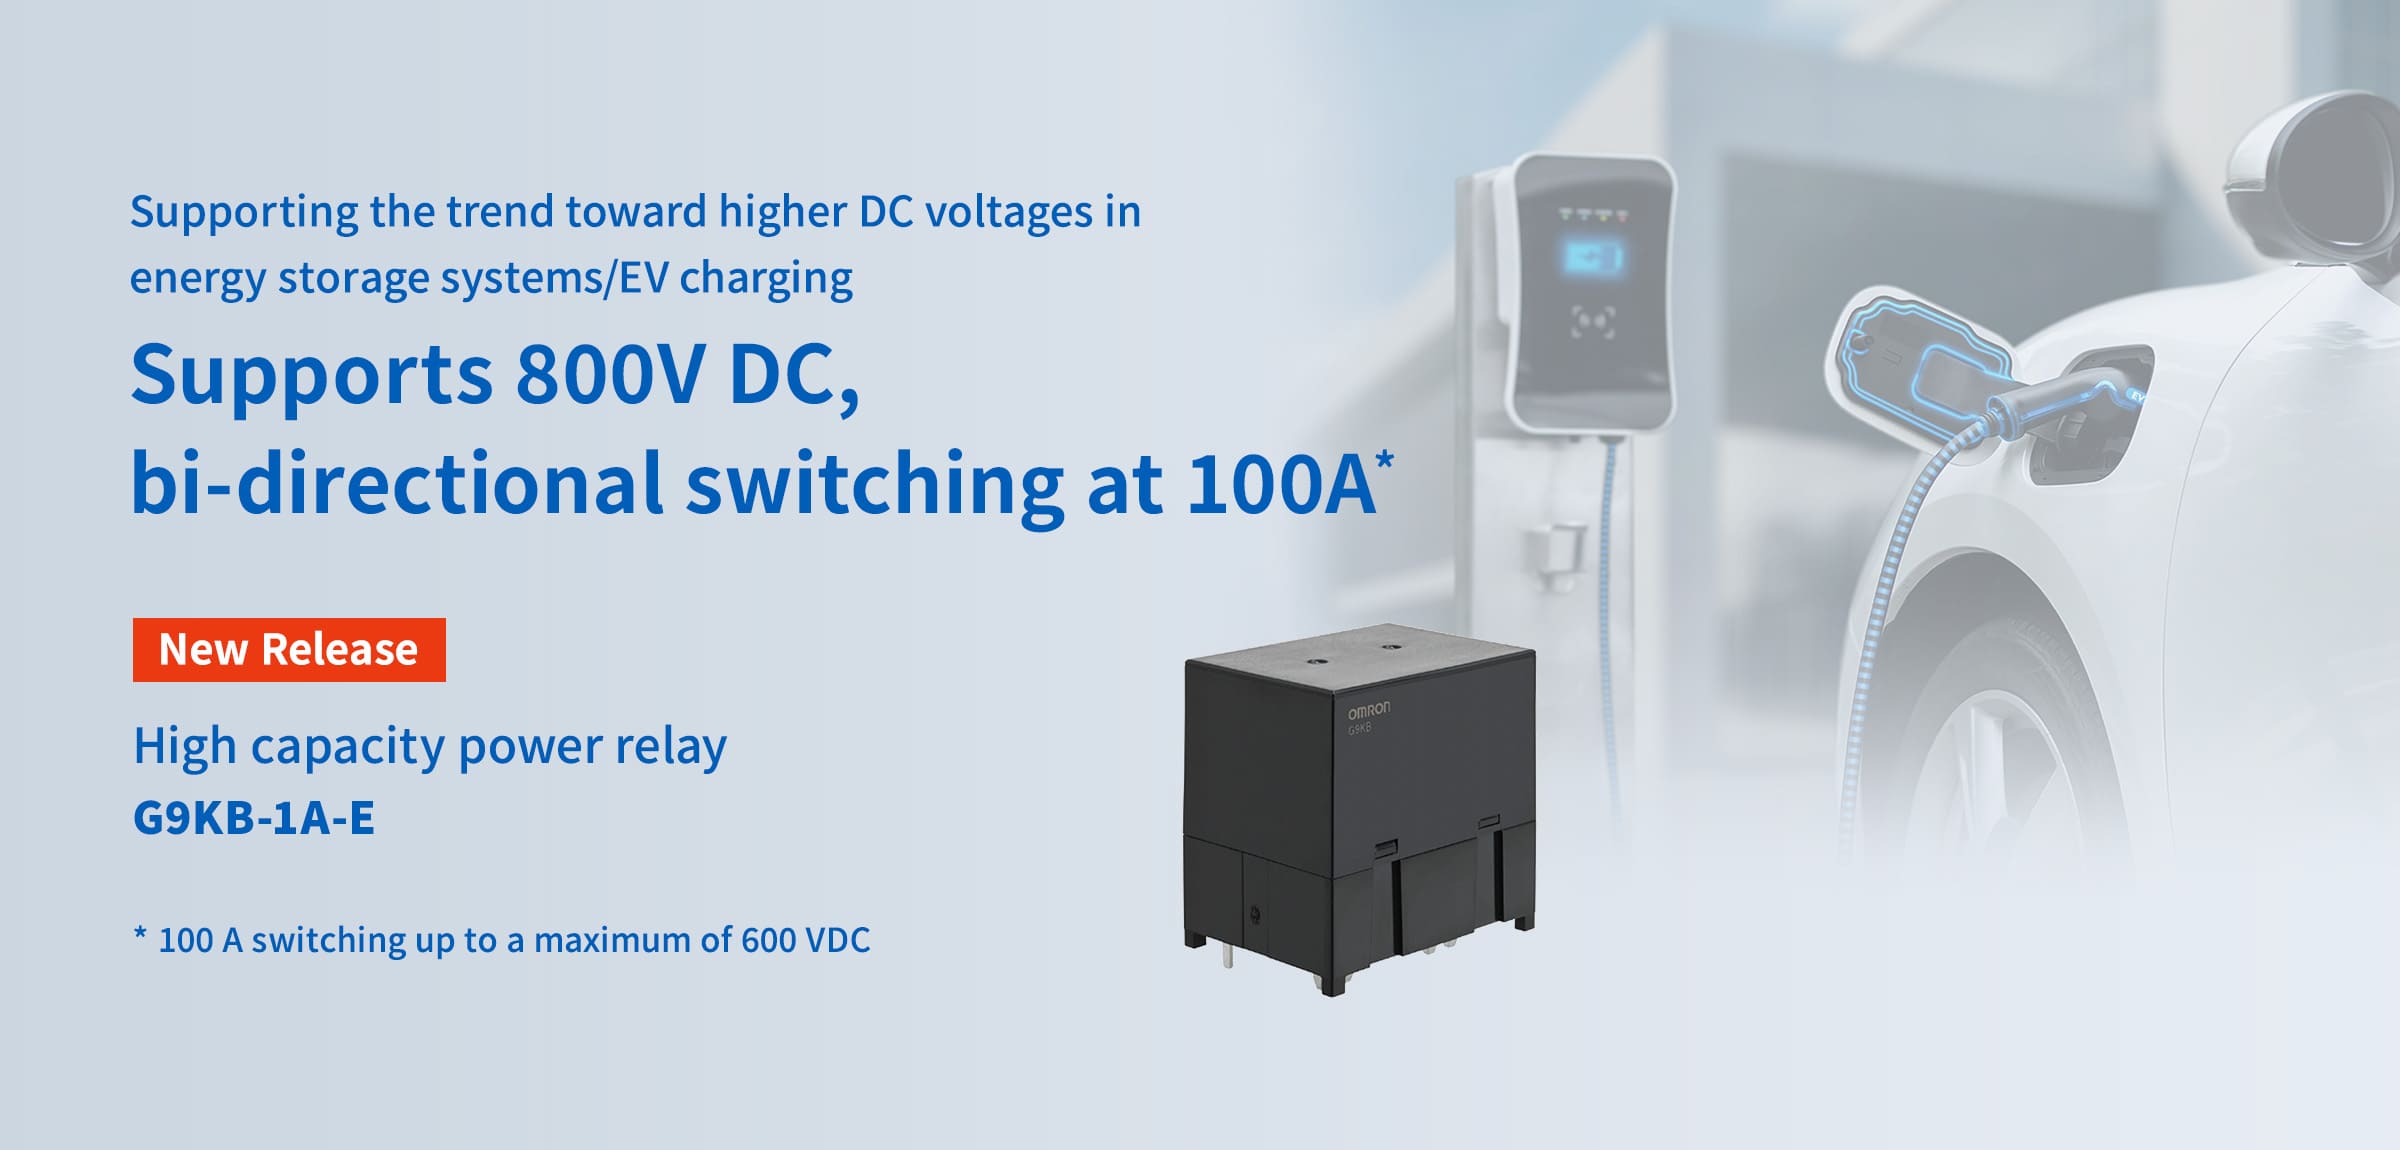 Supporting the trend toward higher DC voltages in energy storage systems/EV charging. Supports 800V DC, bi-directional switching at 100A*. New Release High capacity power relay G9KB-1A-E. * 100 A switching up to a maximum of 600 VDC